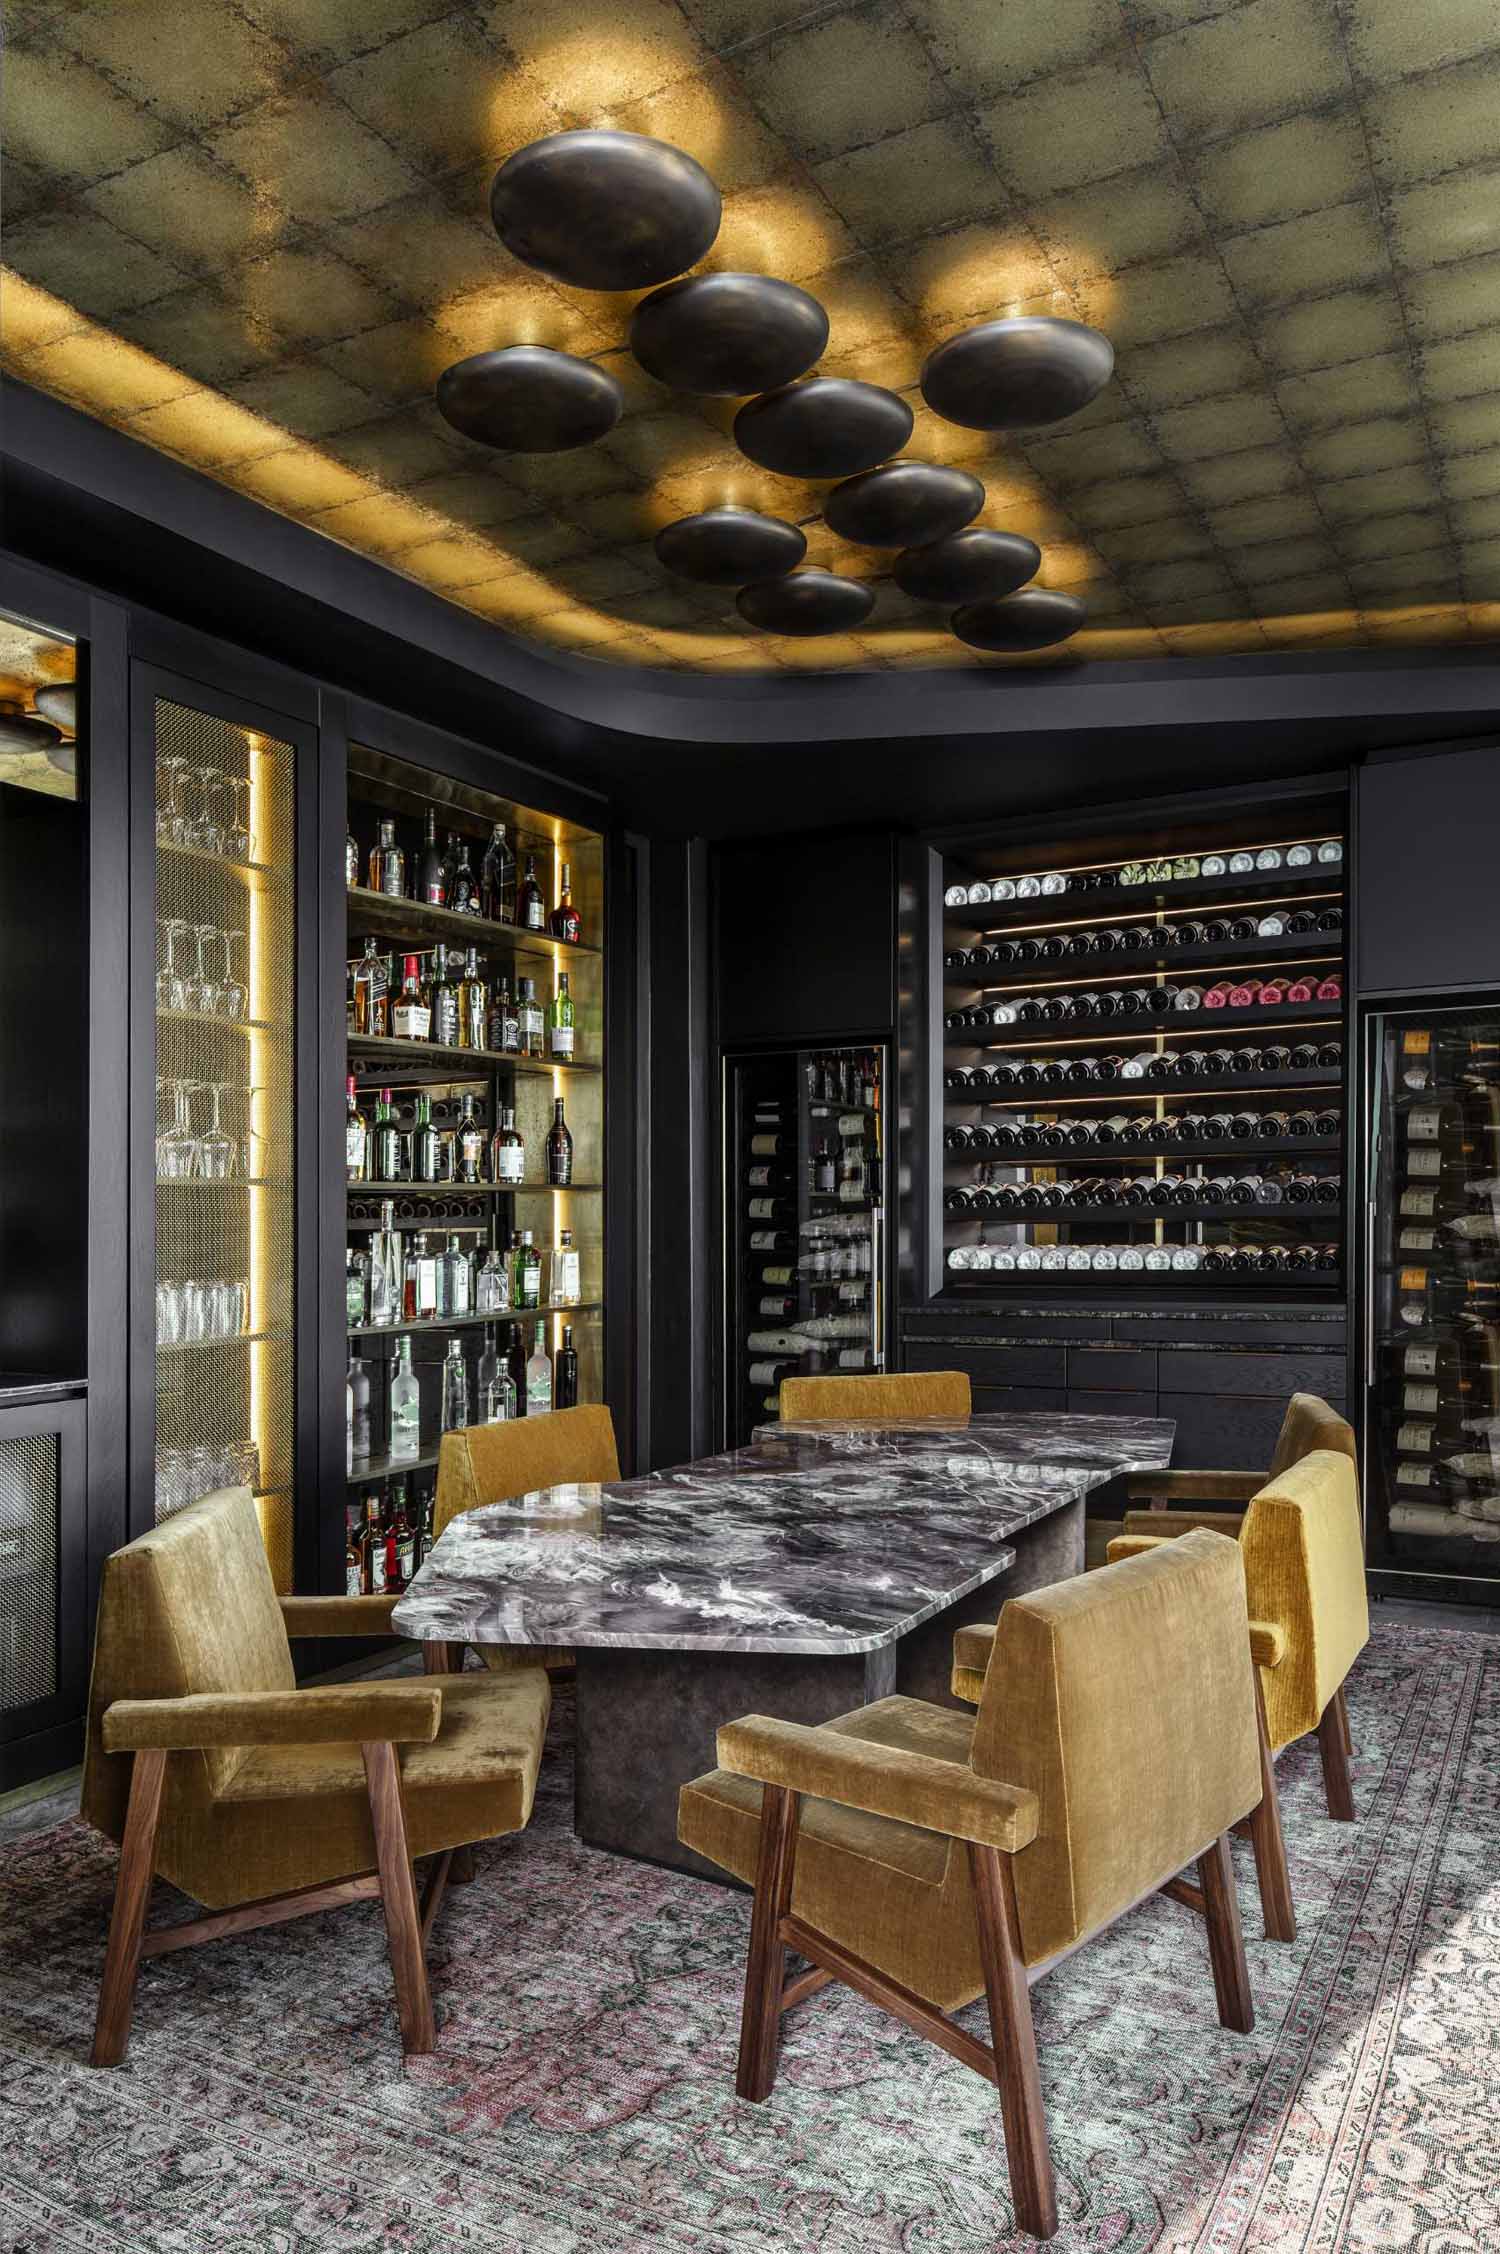 A modern wine room with a large table surrounded by chairs, and shelving for various bottle and glass storage.